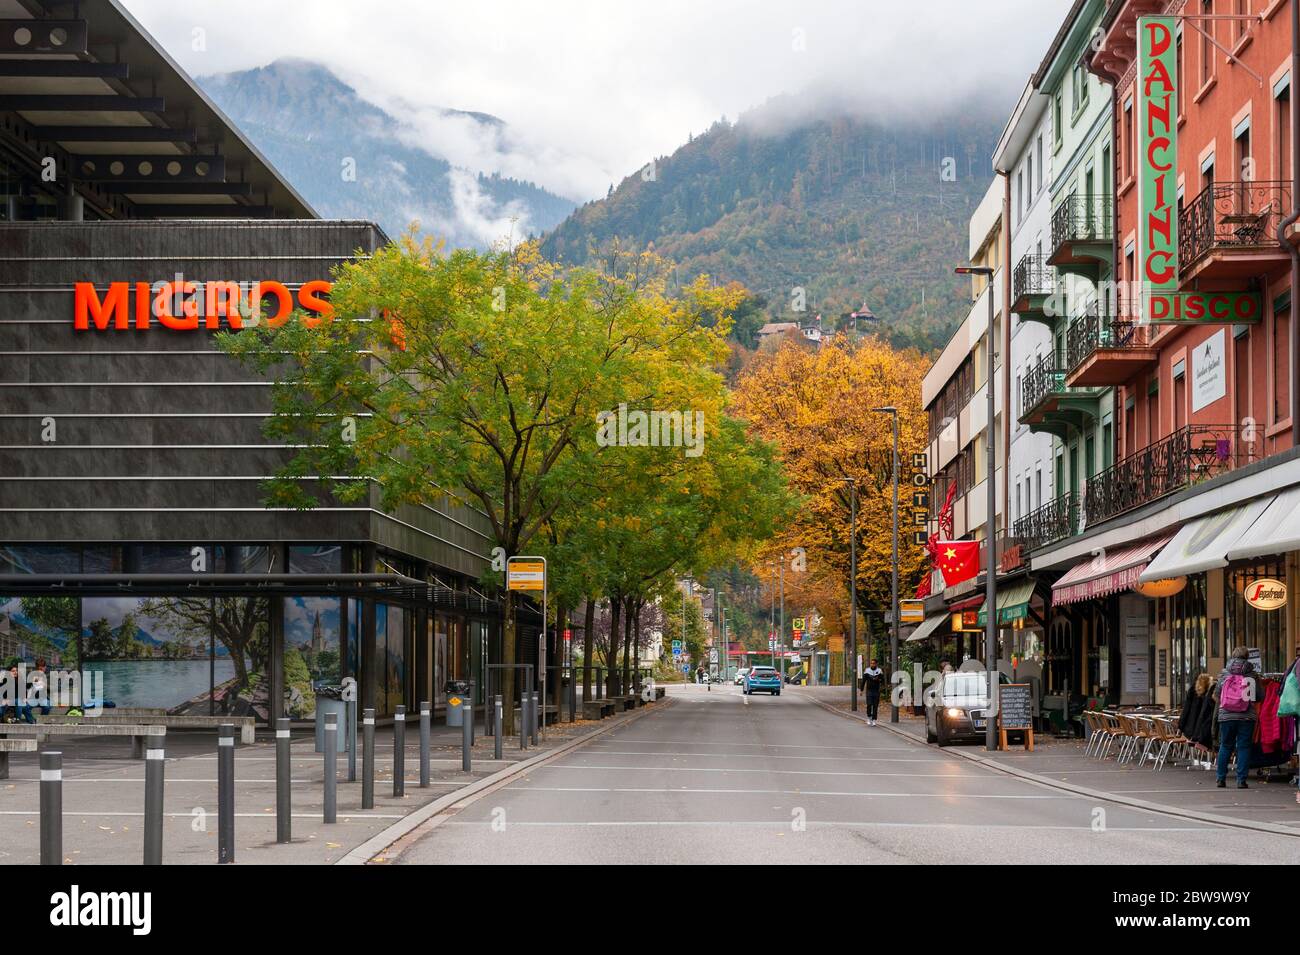 Local branch of Migros, a supermarket located on station road in downtown Interlaken, a famous resort town destination in Switzerland Stock Photo